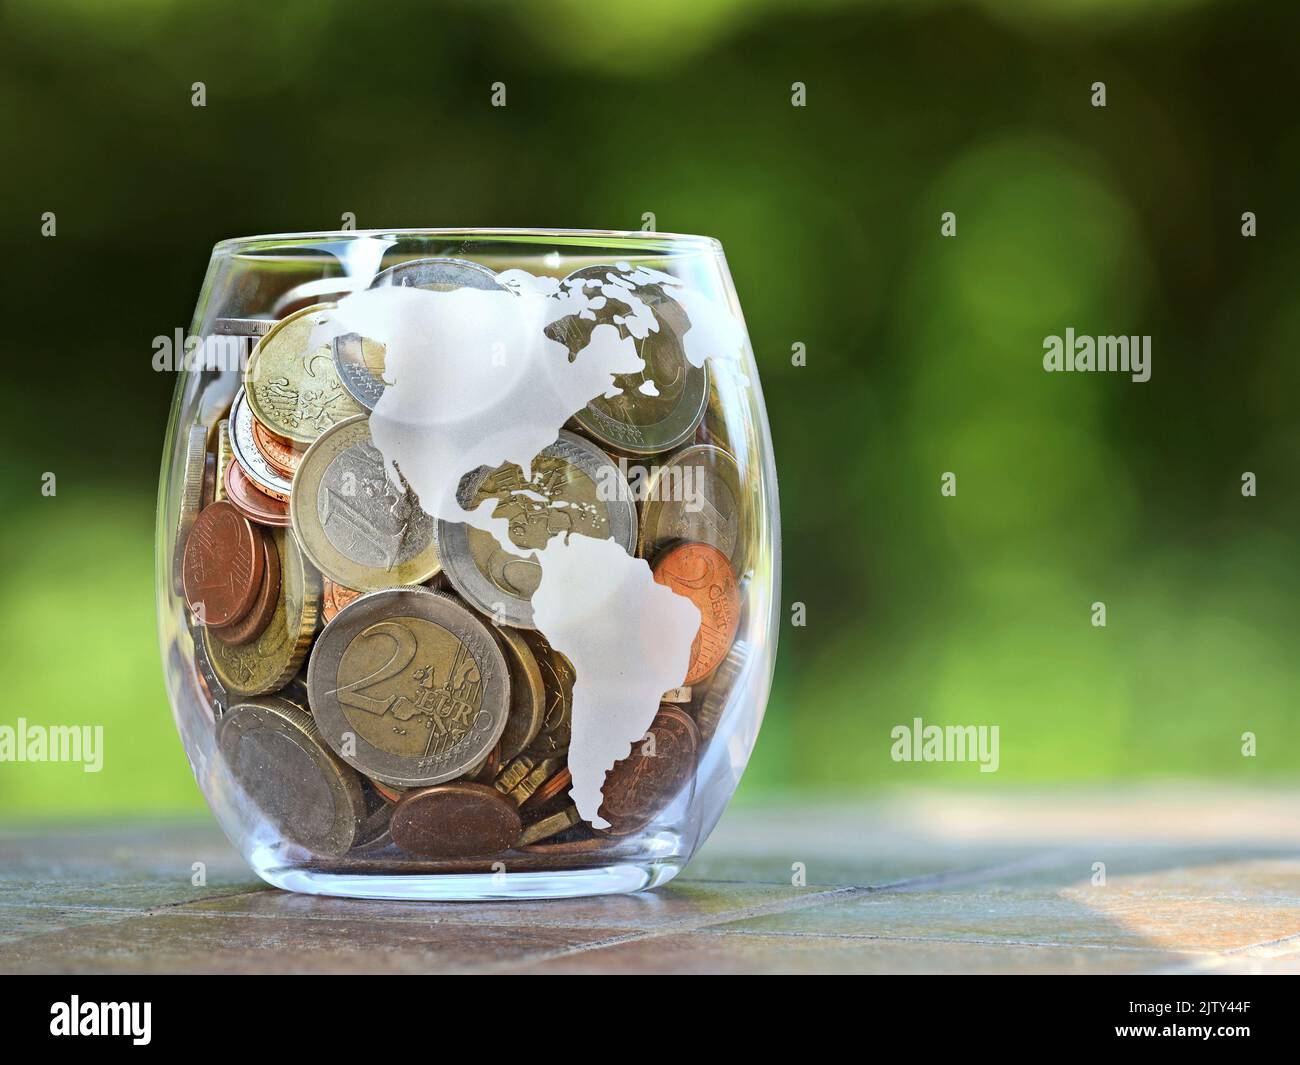 euro coins collected for vacation in glass jar with america map inprint, green blured background Stock Photo